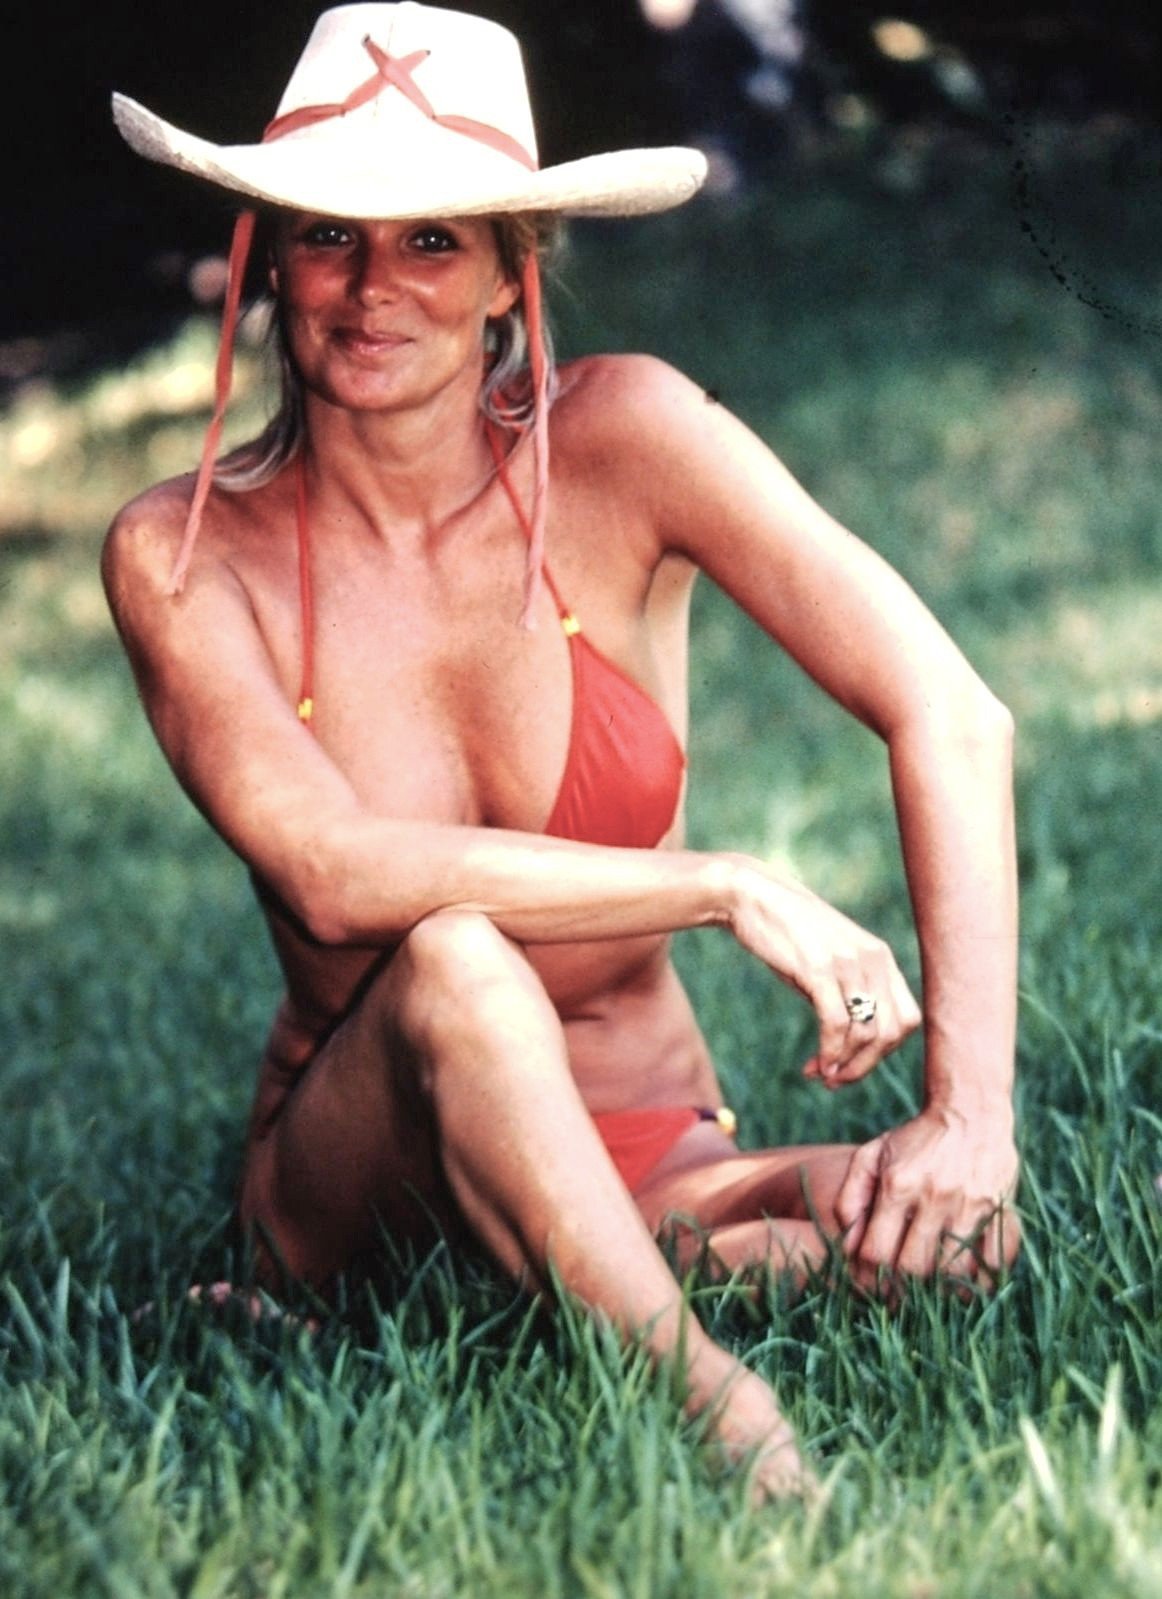 Photo by nudes-des-artiste with the username @nudes-des-artiste,  January 9, 2020 at 6:20 PM. The post is about the topic Beautiful Girls and the text says 'Women We Love: Linda Evans

#lindaevans #smile #celebrity #bikini'